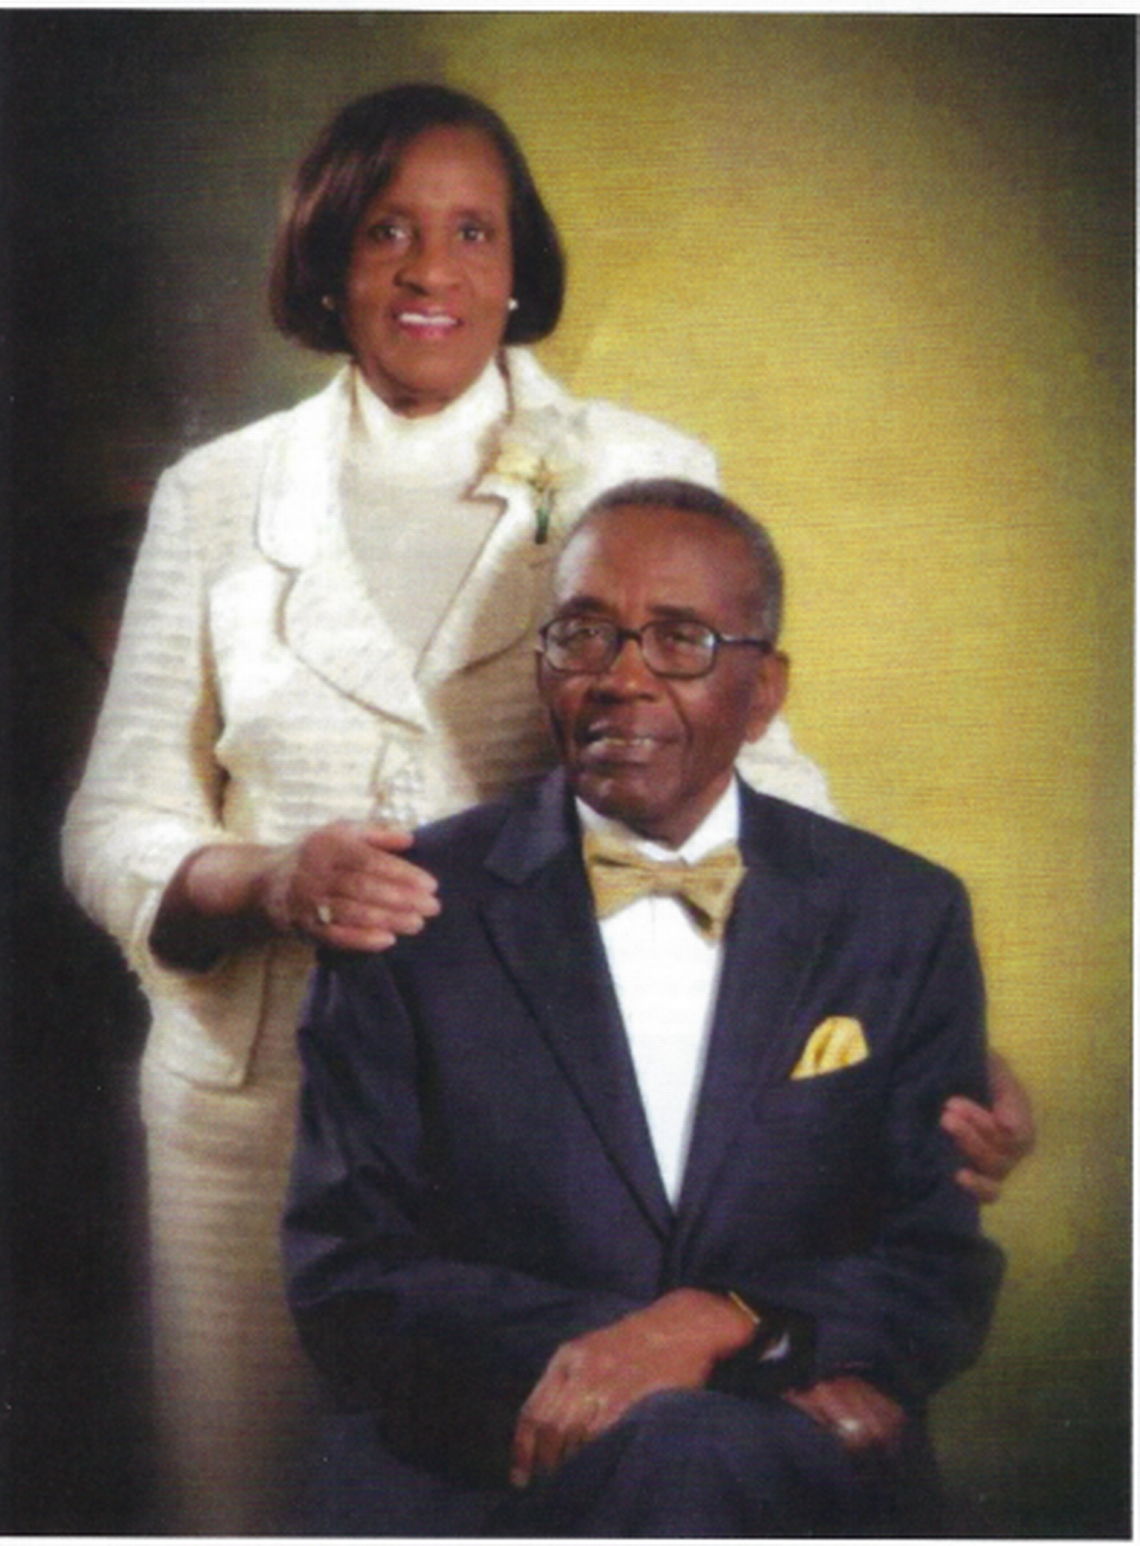 Reaner Shannon with her husband of 62 years, Henry Shannon